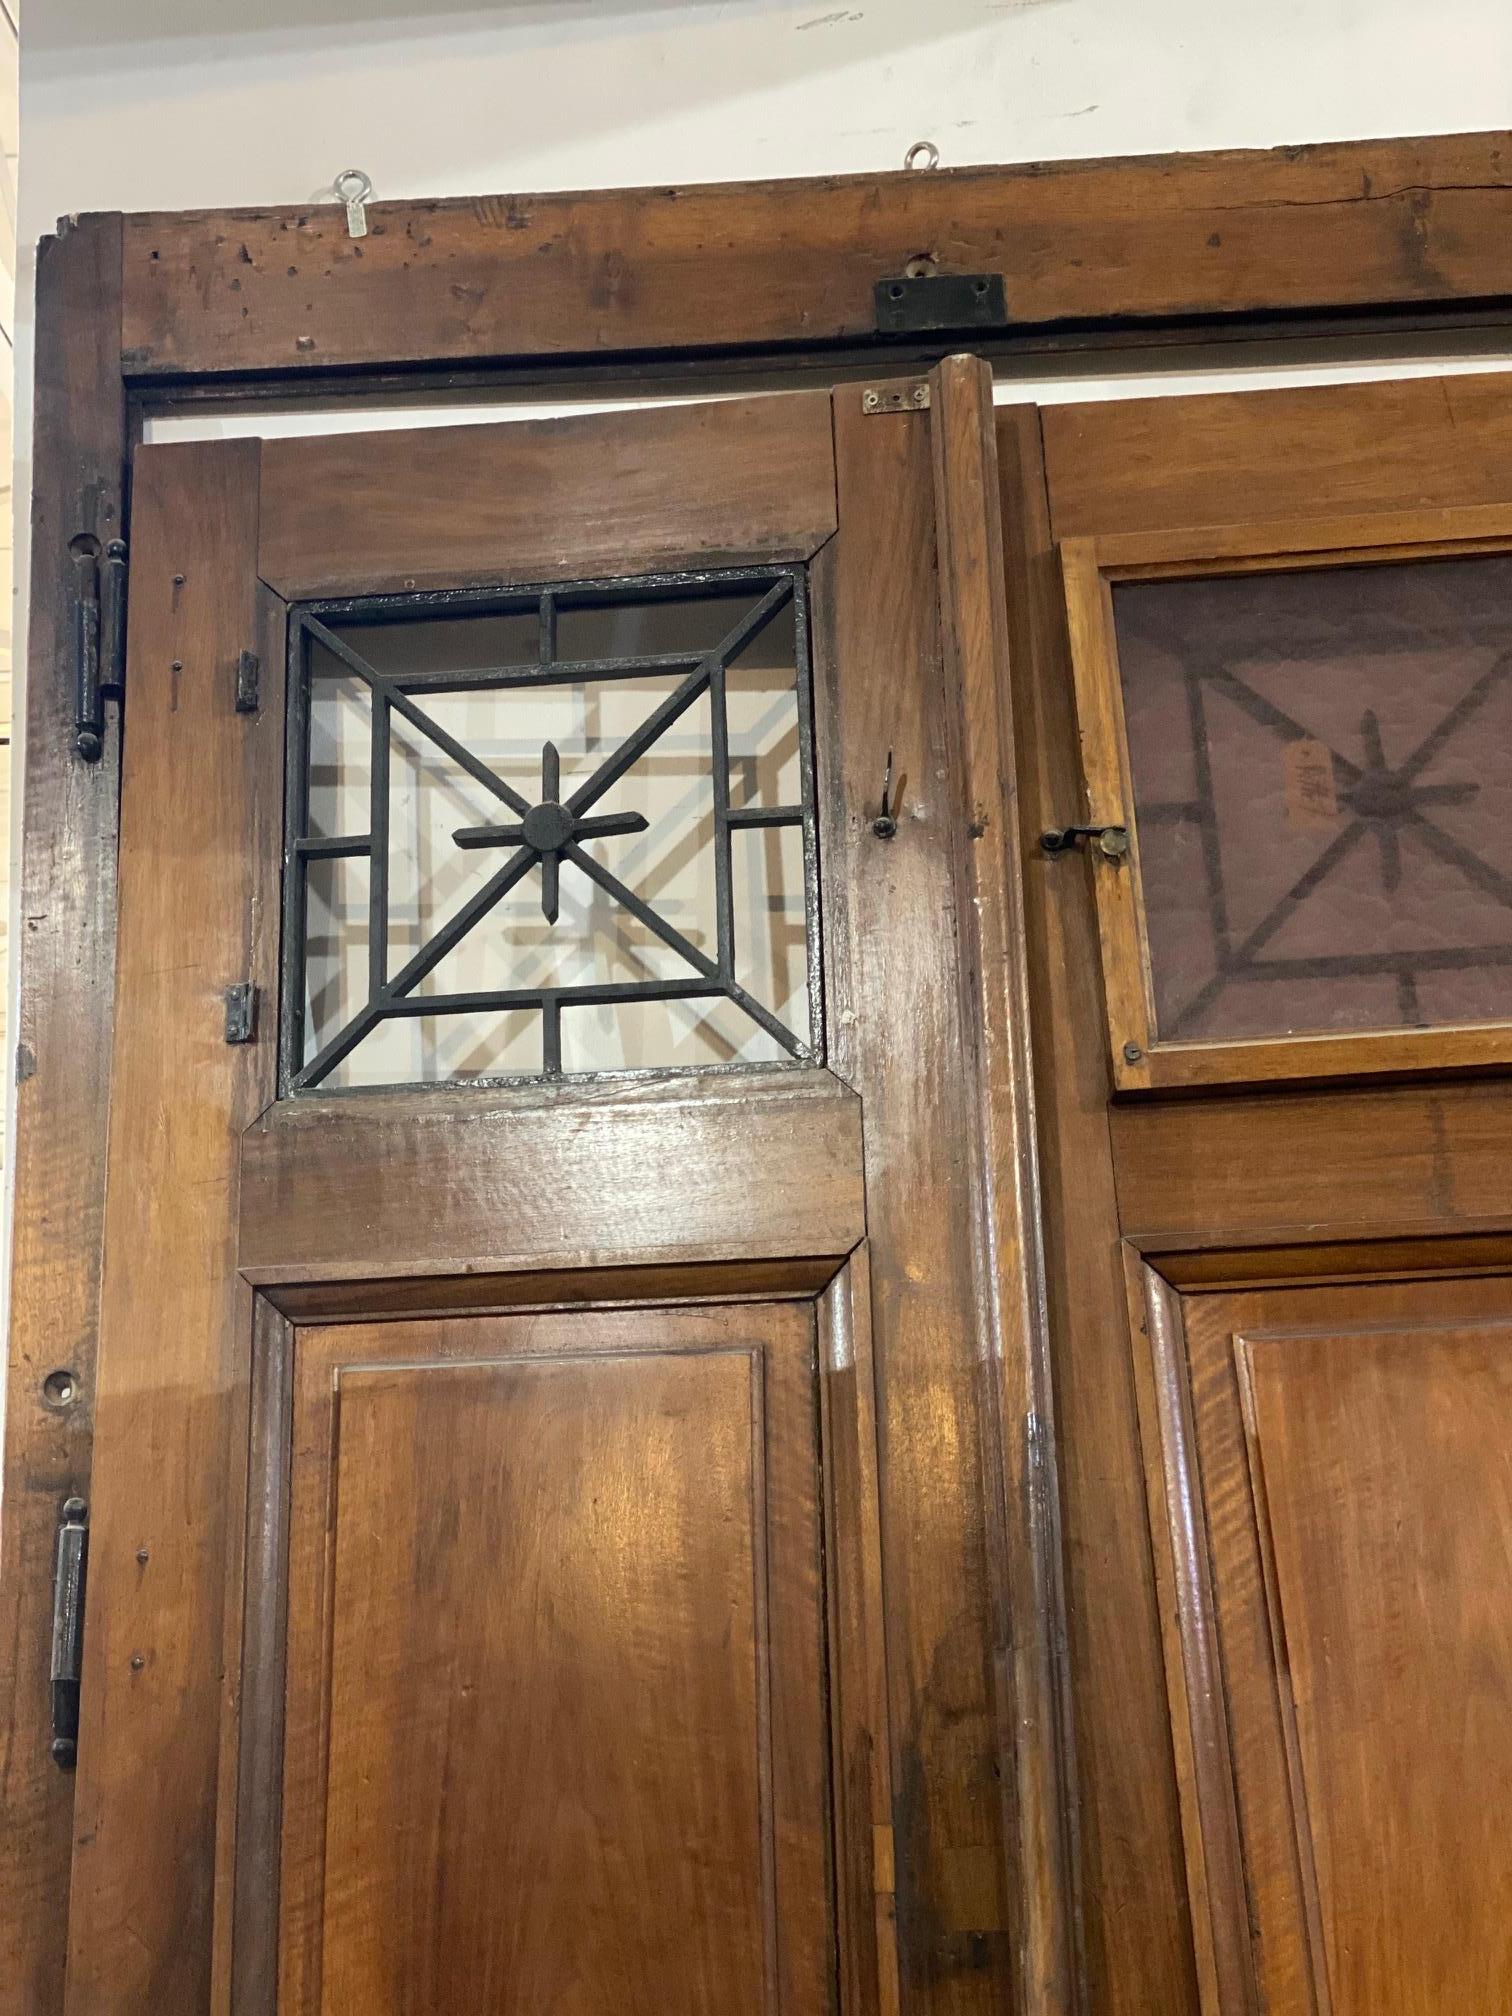 We have this antique French double-door with transom. The above double windows have iron work in geometric patterns. One of the windows is missing the textured glass. Frame included, circa 1860.

Measurements with frame: 110